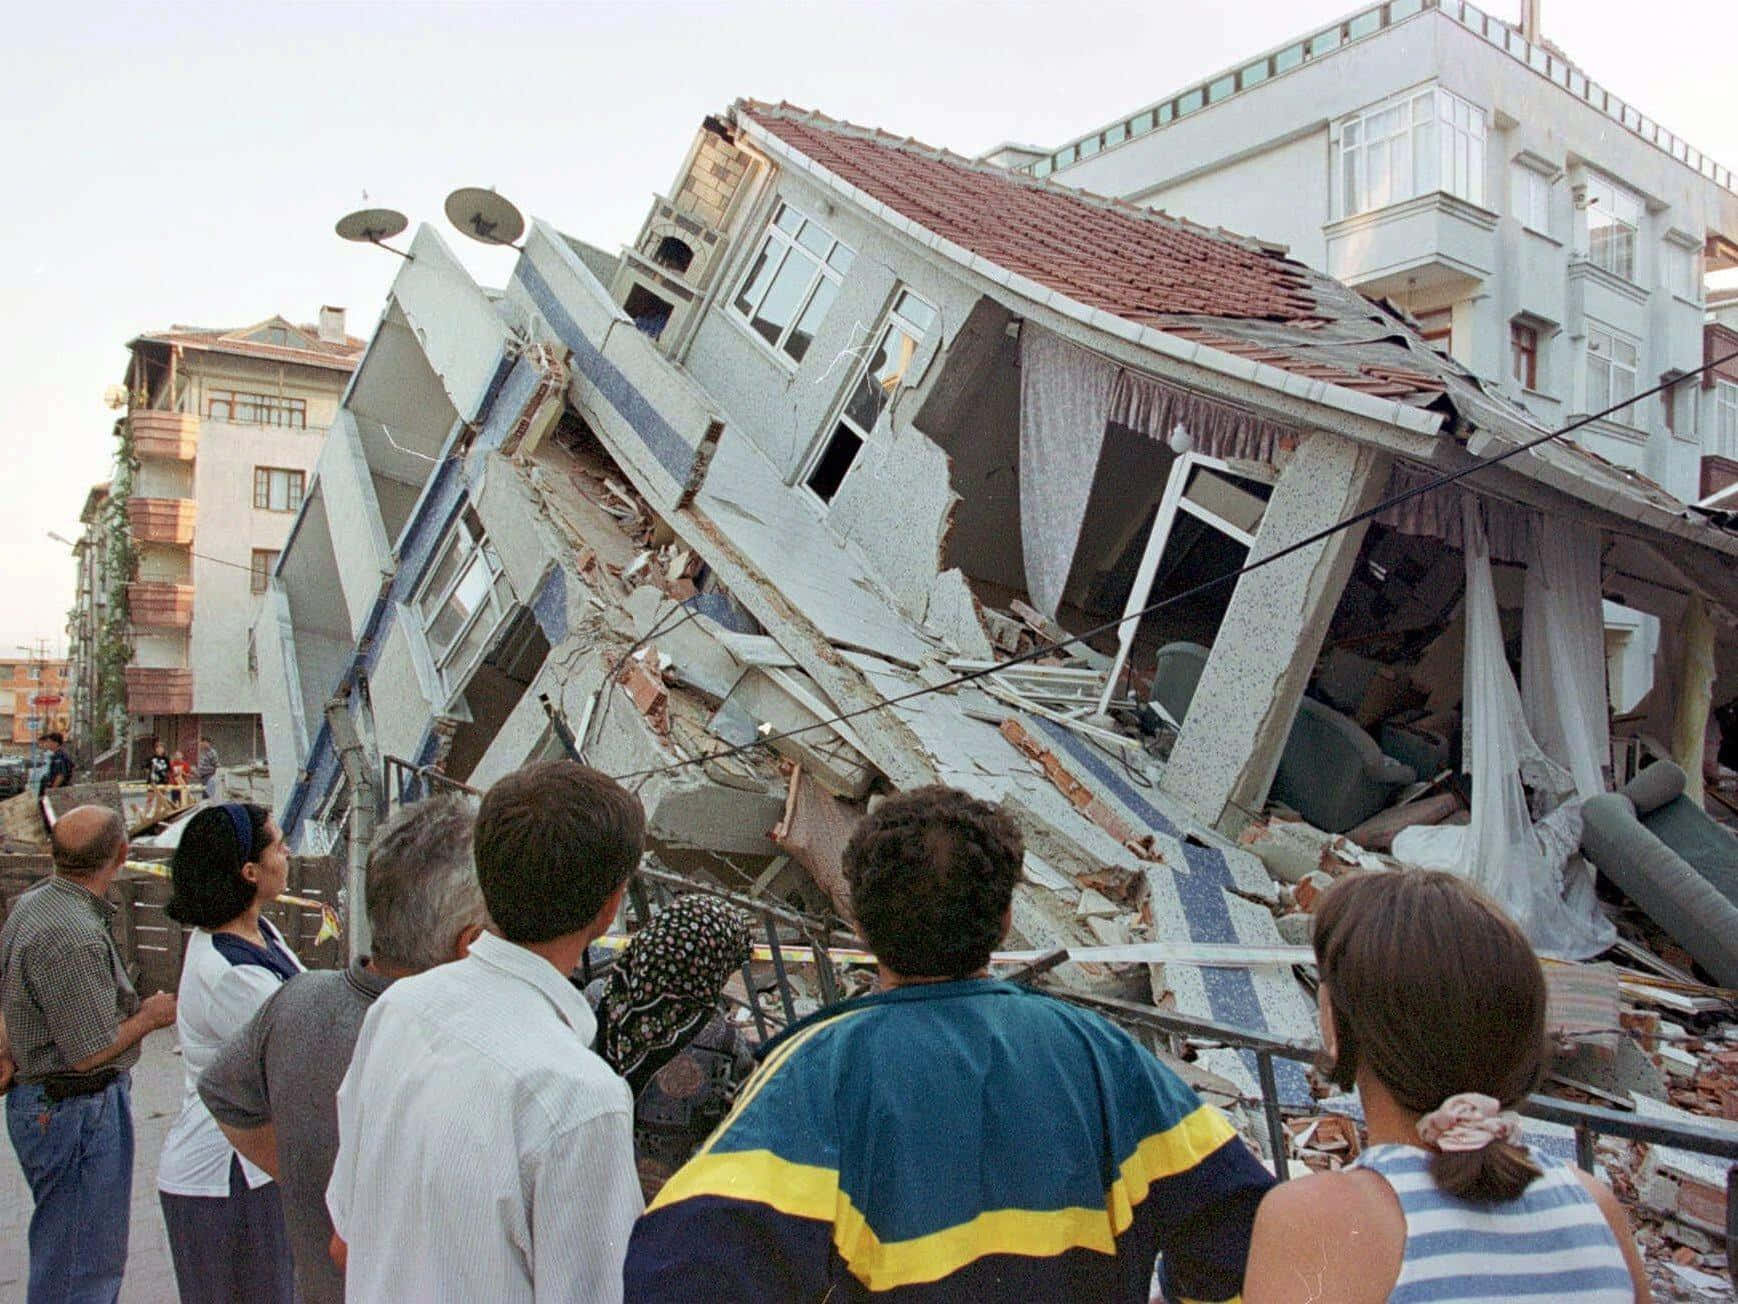 A Group Of People Standing Around A Building That Has Fallen Down